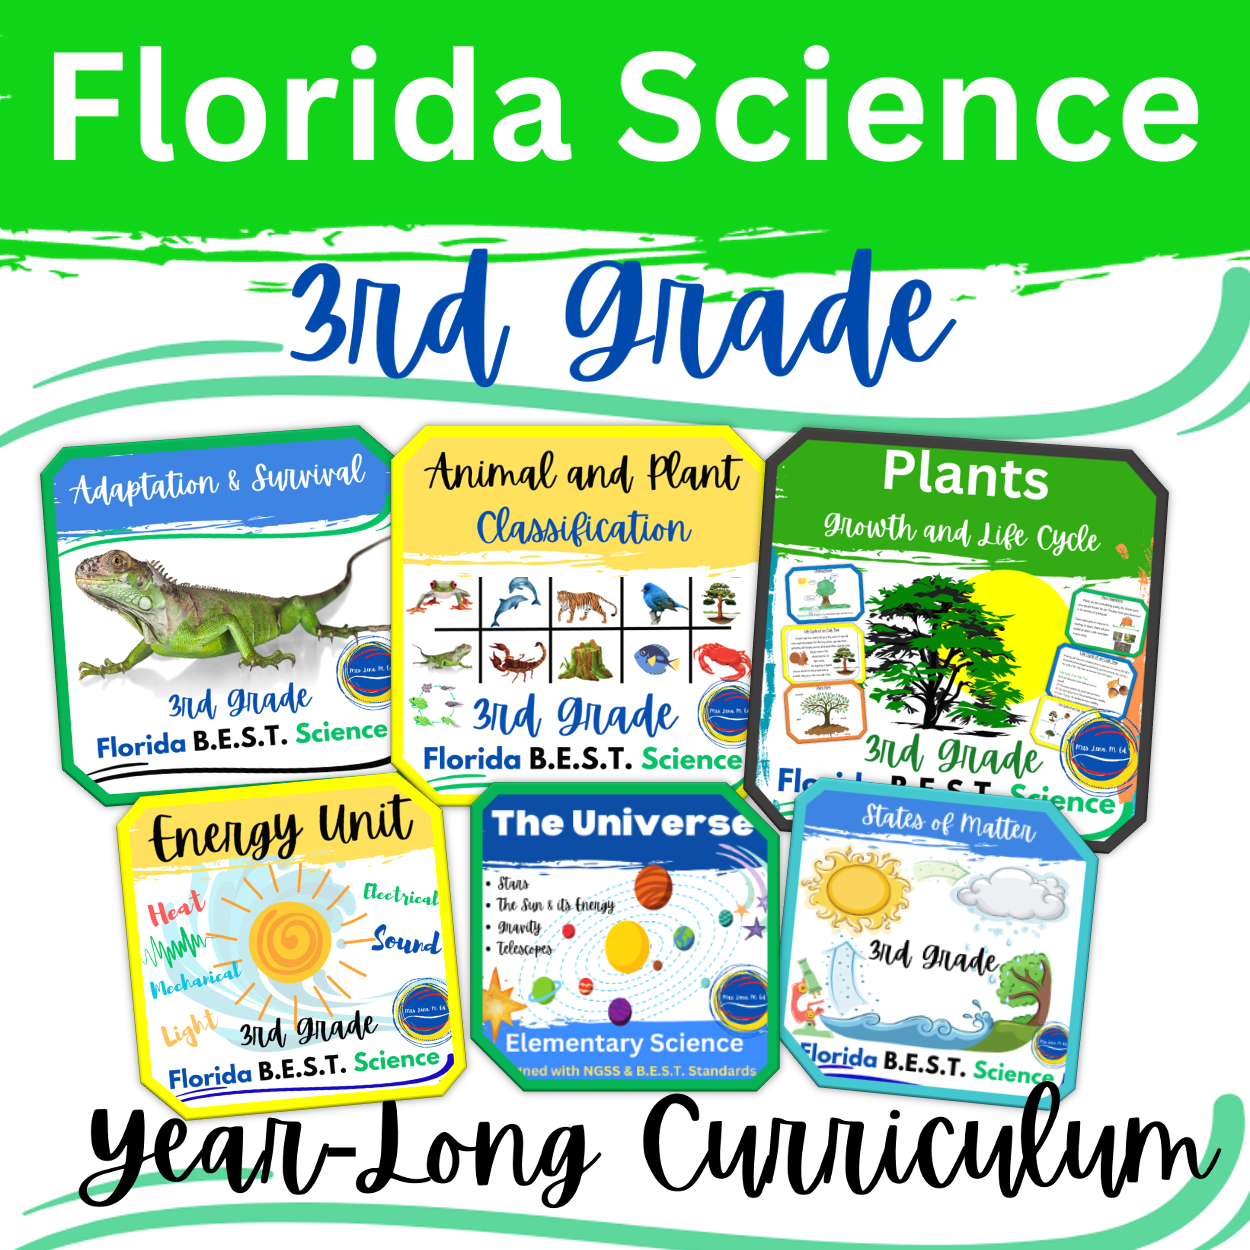 3rd Grade Florida Science Year Long Curriculum Bundle is aligned with the B.E.S.T. State Science Standards. This full year-long curriculum bundle includes all lessons, topics, and concepts. Print and GO. Teach, re-teach, test-prep, and asses.

